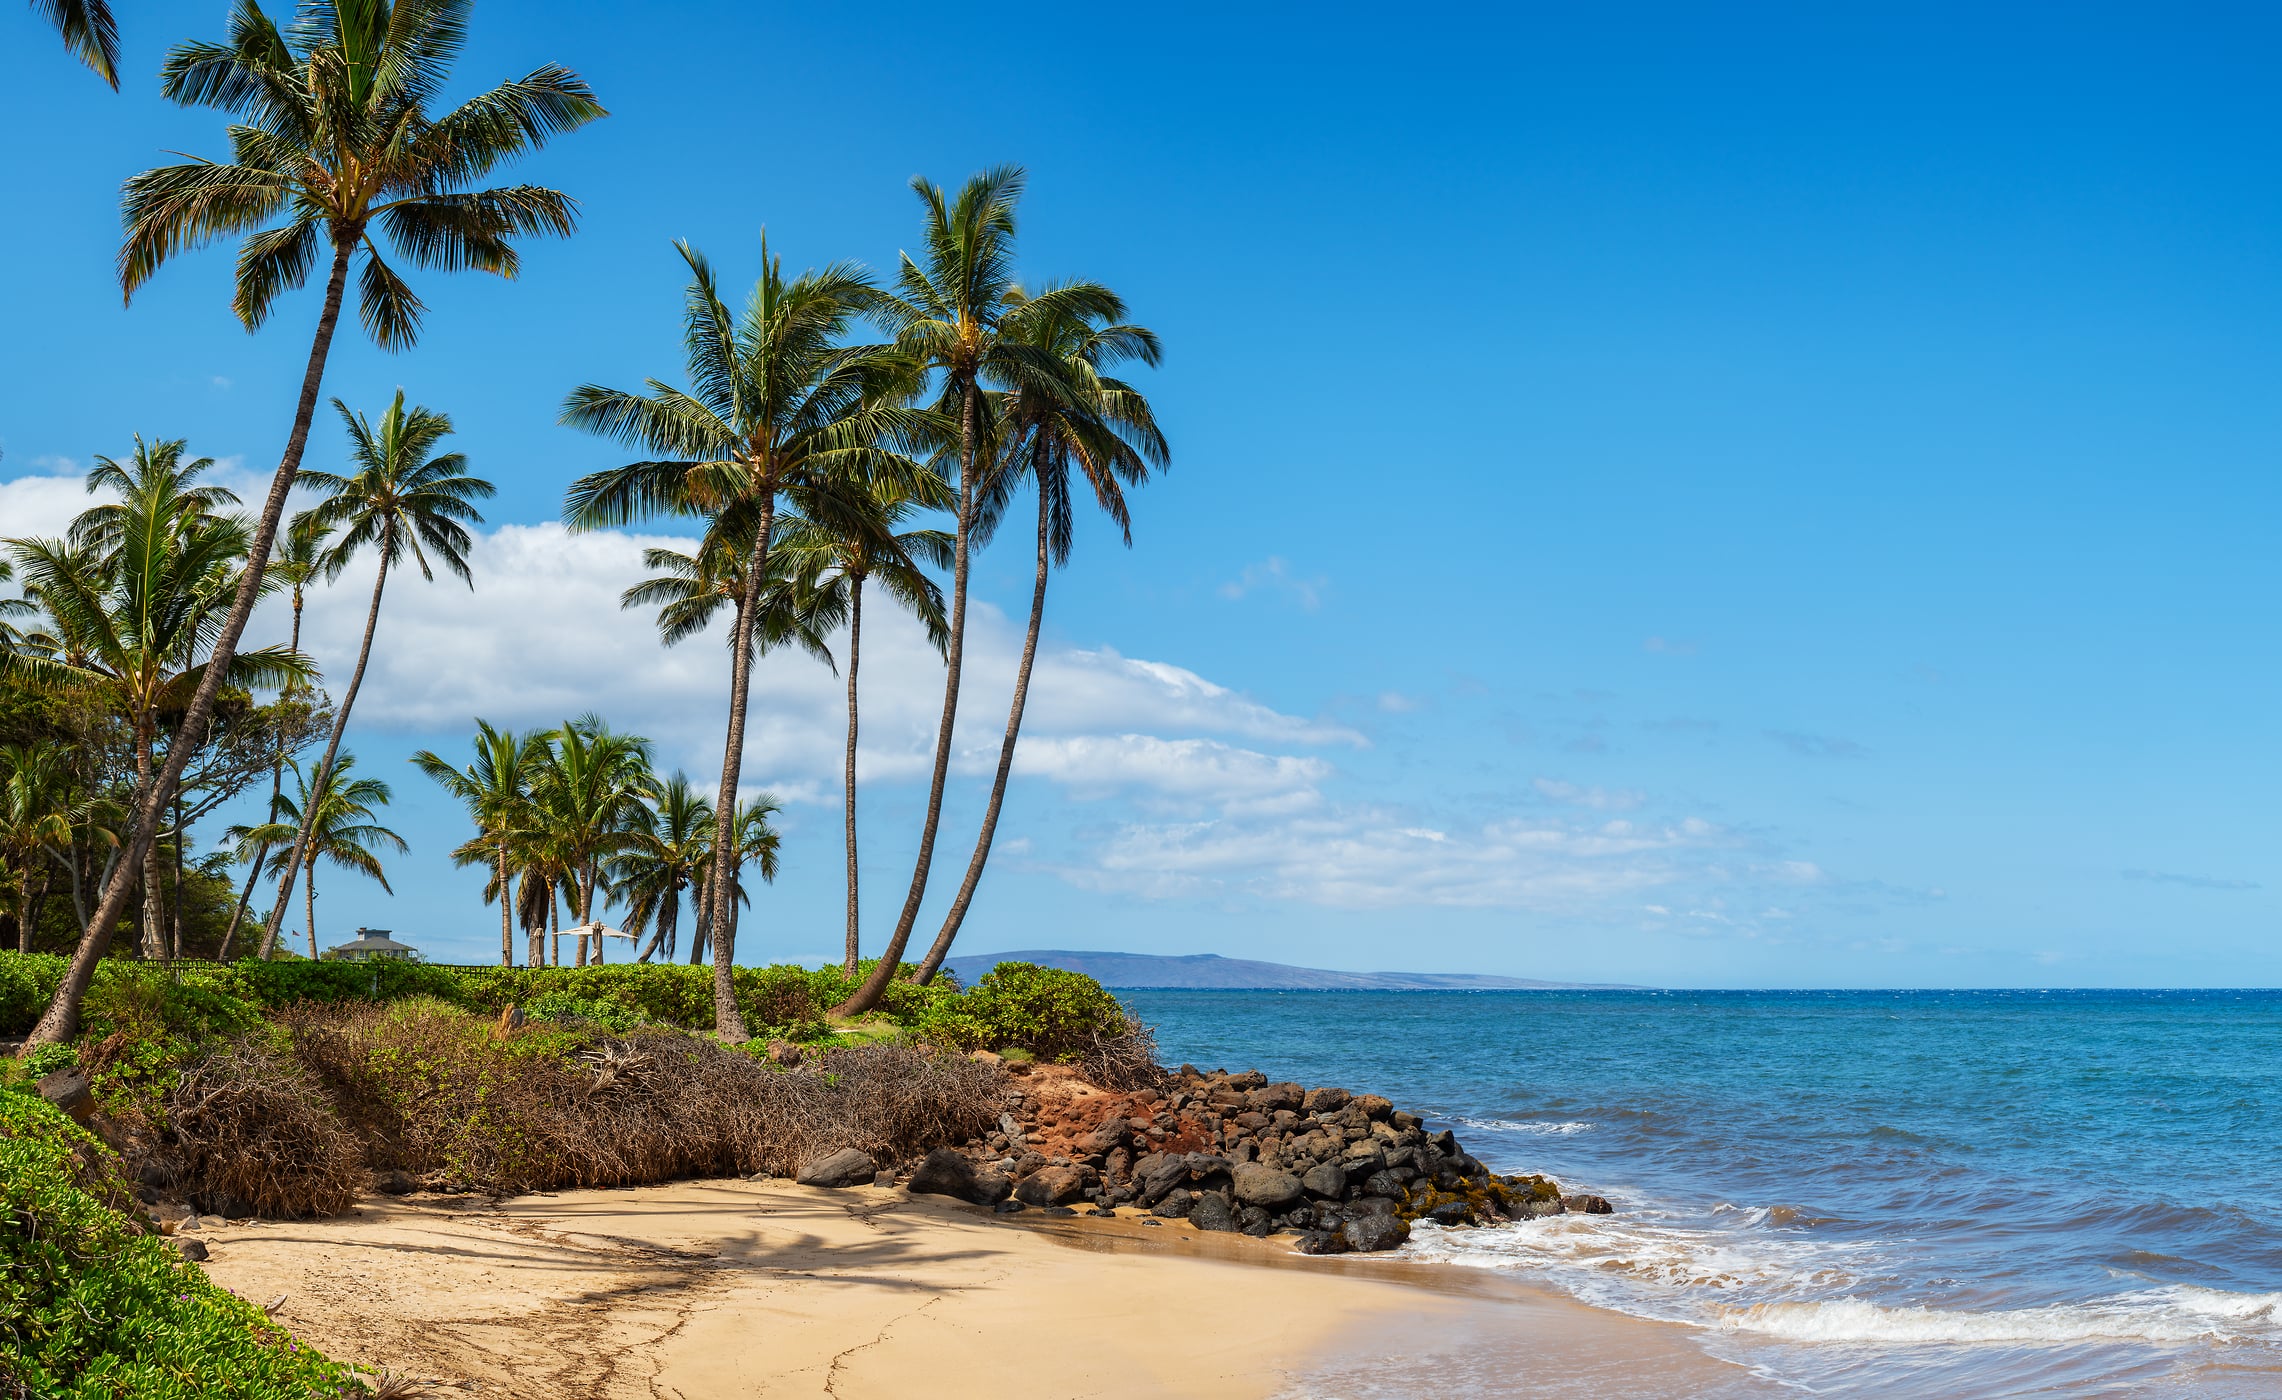 342 megapixels! A very high resolution, large-format VAST photo print of a tropical beach in Maui with palm trees and the Pacific Ocean; beach photograph created by Jim Tarpo in Kihei, Maui, Hawaii.